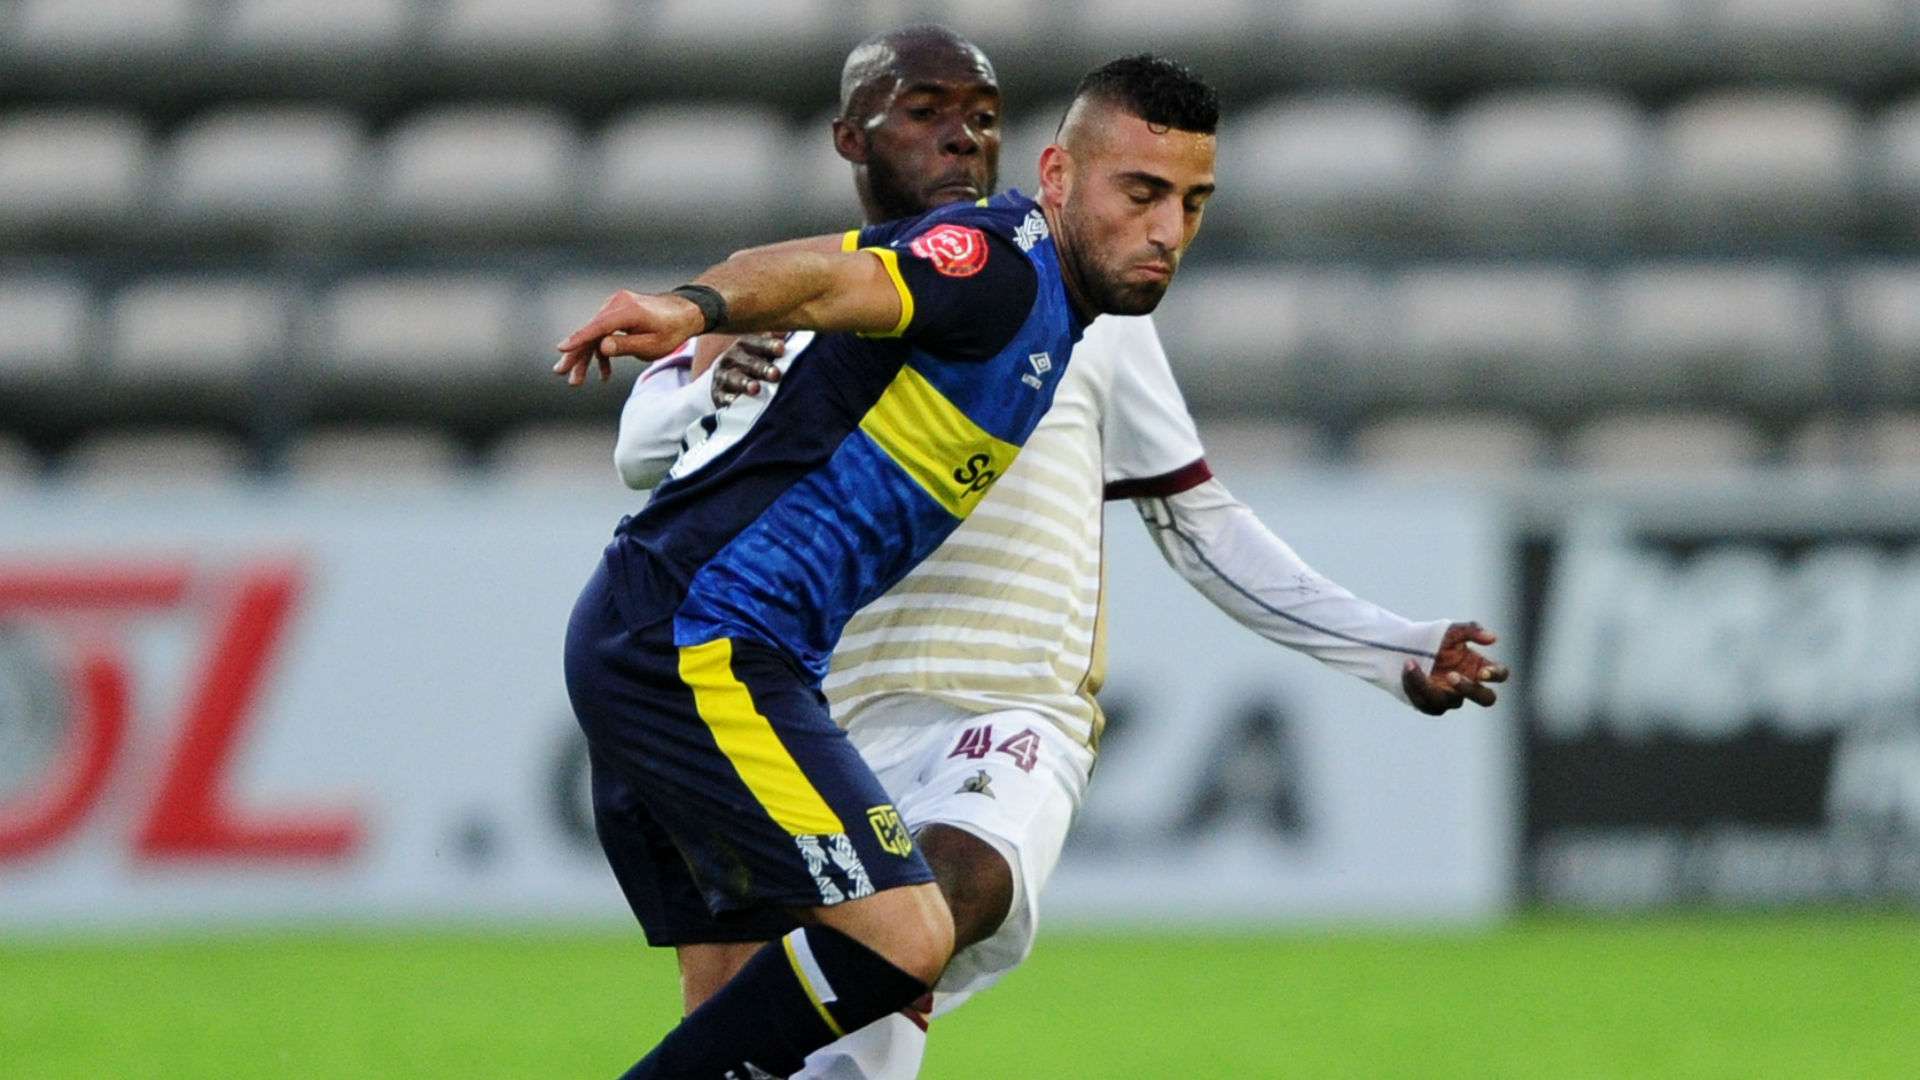 Christopher David of Cape Town City is challenged by Junior Awono of Stellenbosch FC, August 2019